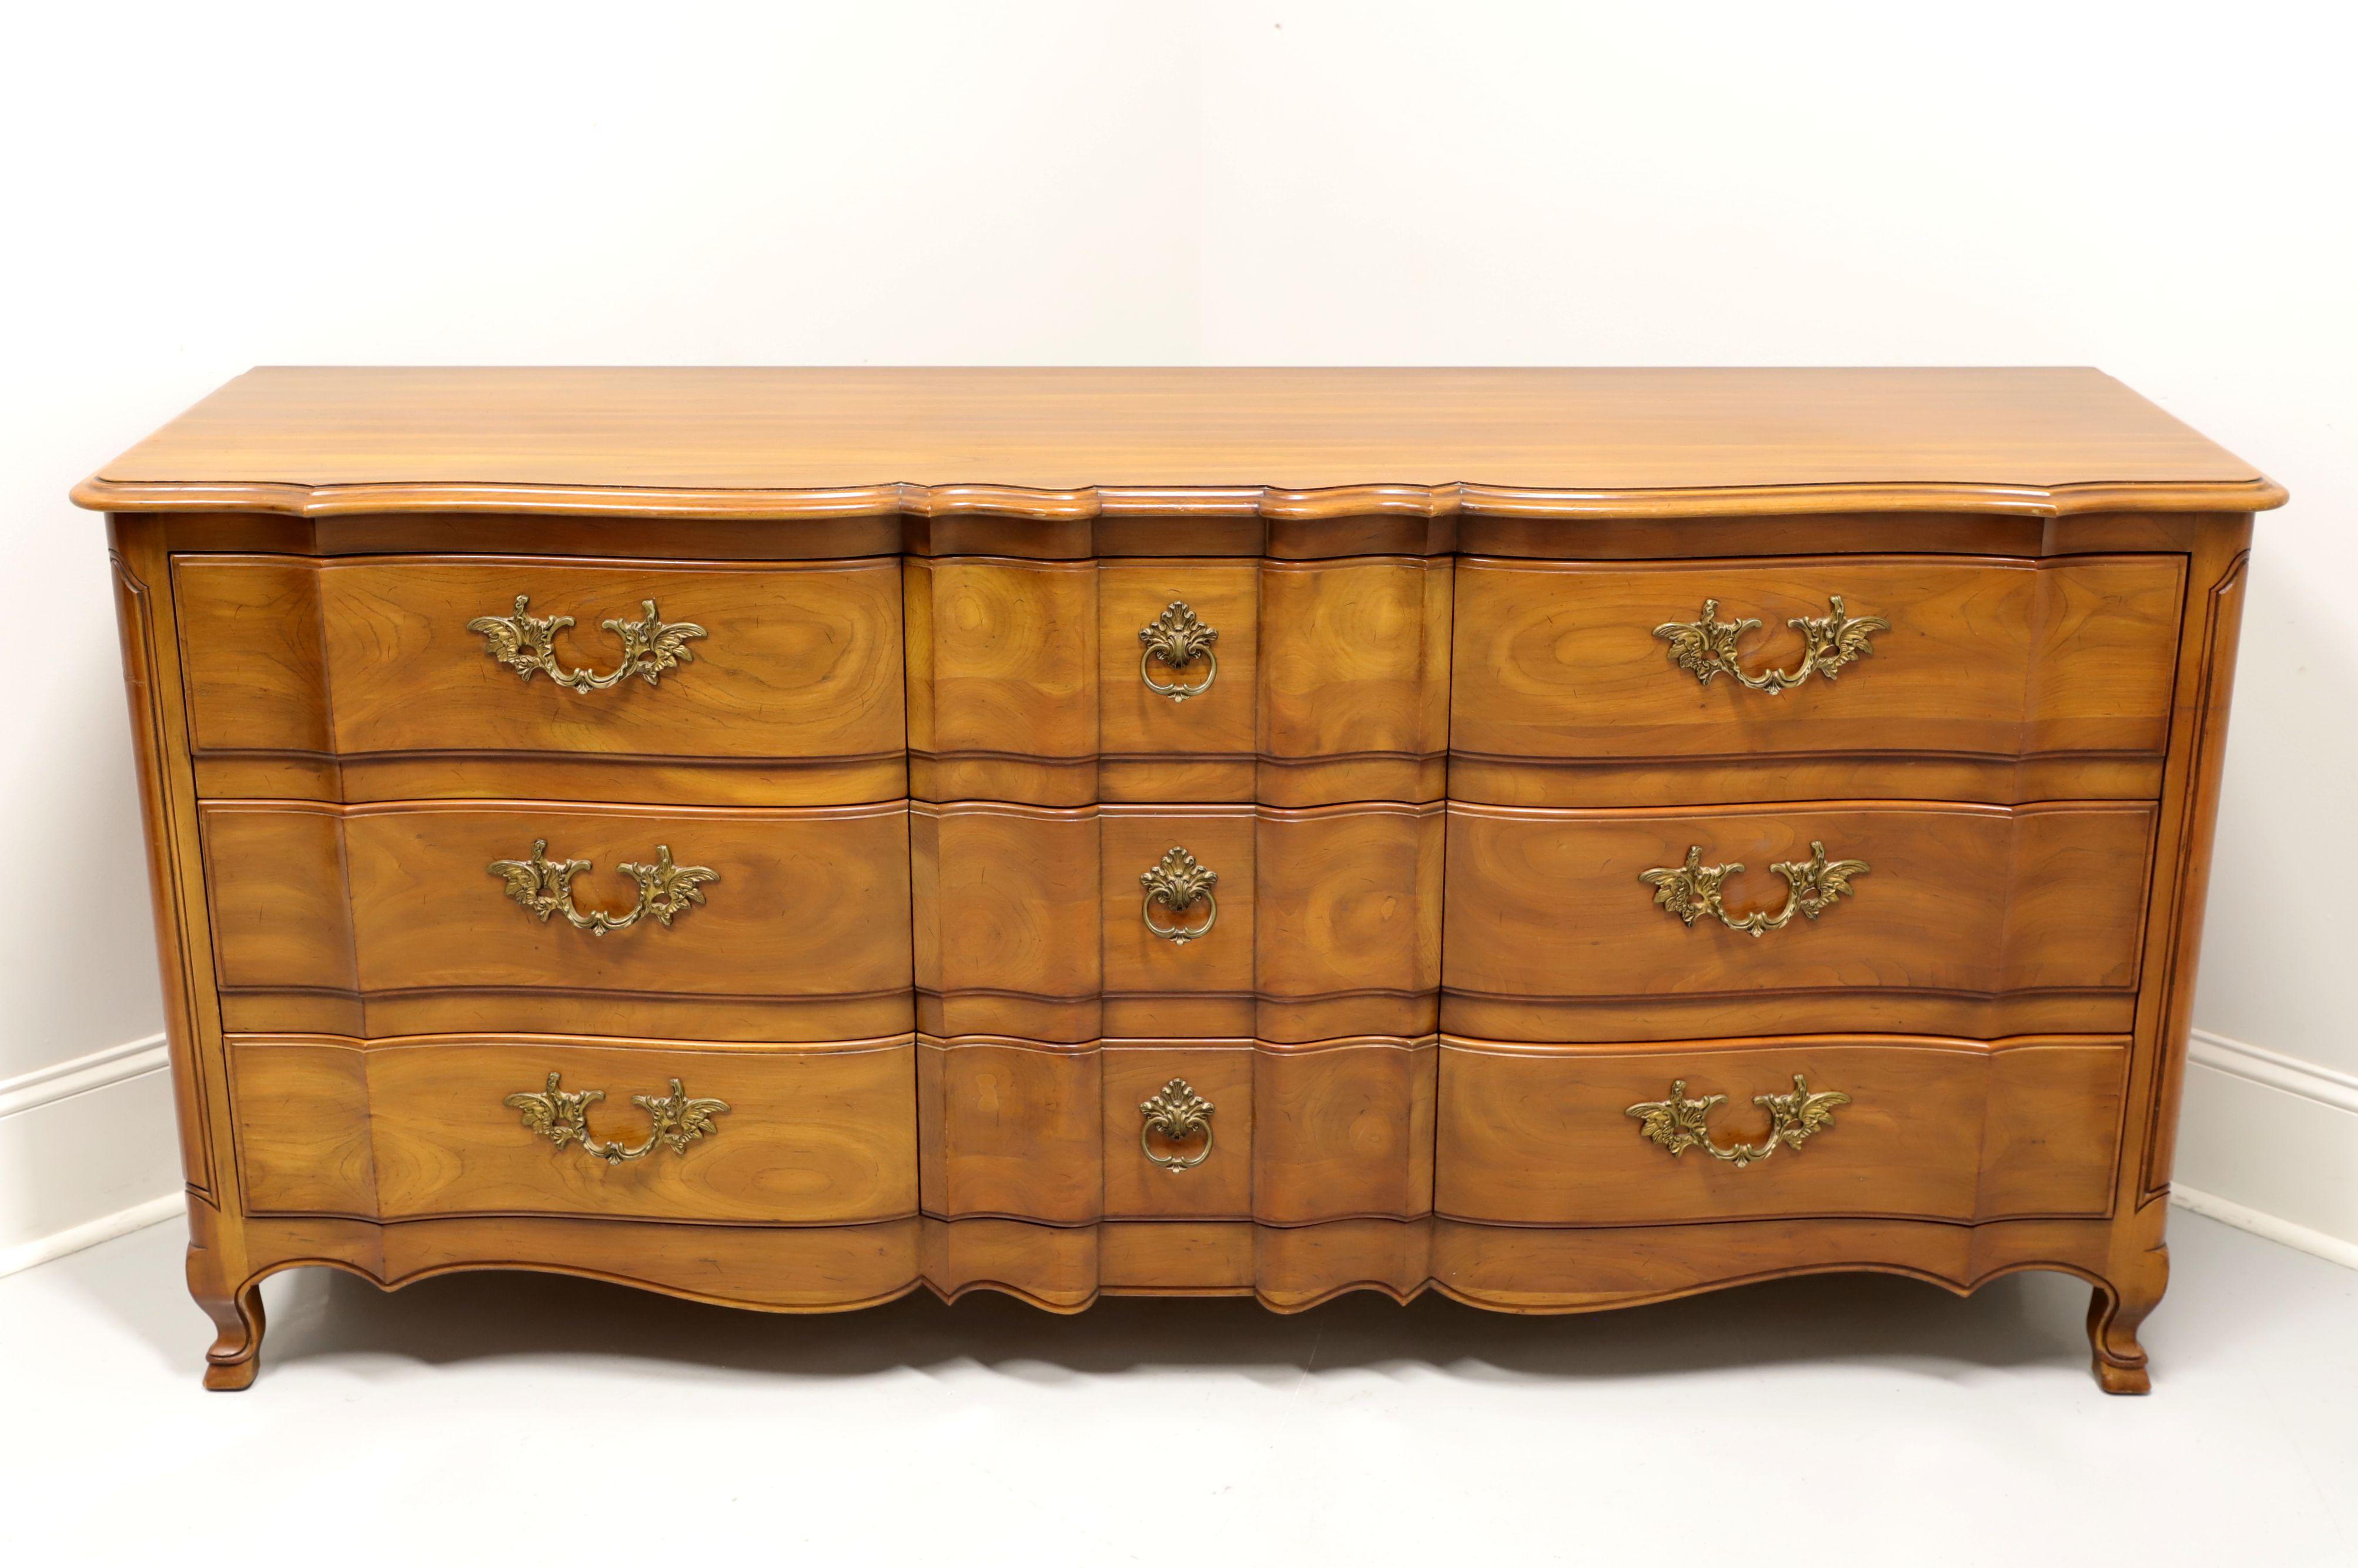 A French Country style nine drawer triple dresser by John Widdicomb, of Grand Rapids, Michigan, USA. Solid cherry with brass hardware, serpentine front, carved panels to front sides and scroll feet. Features nine drawers of dovetail construction